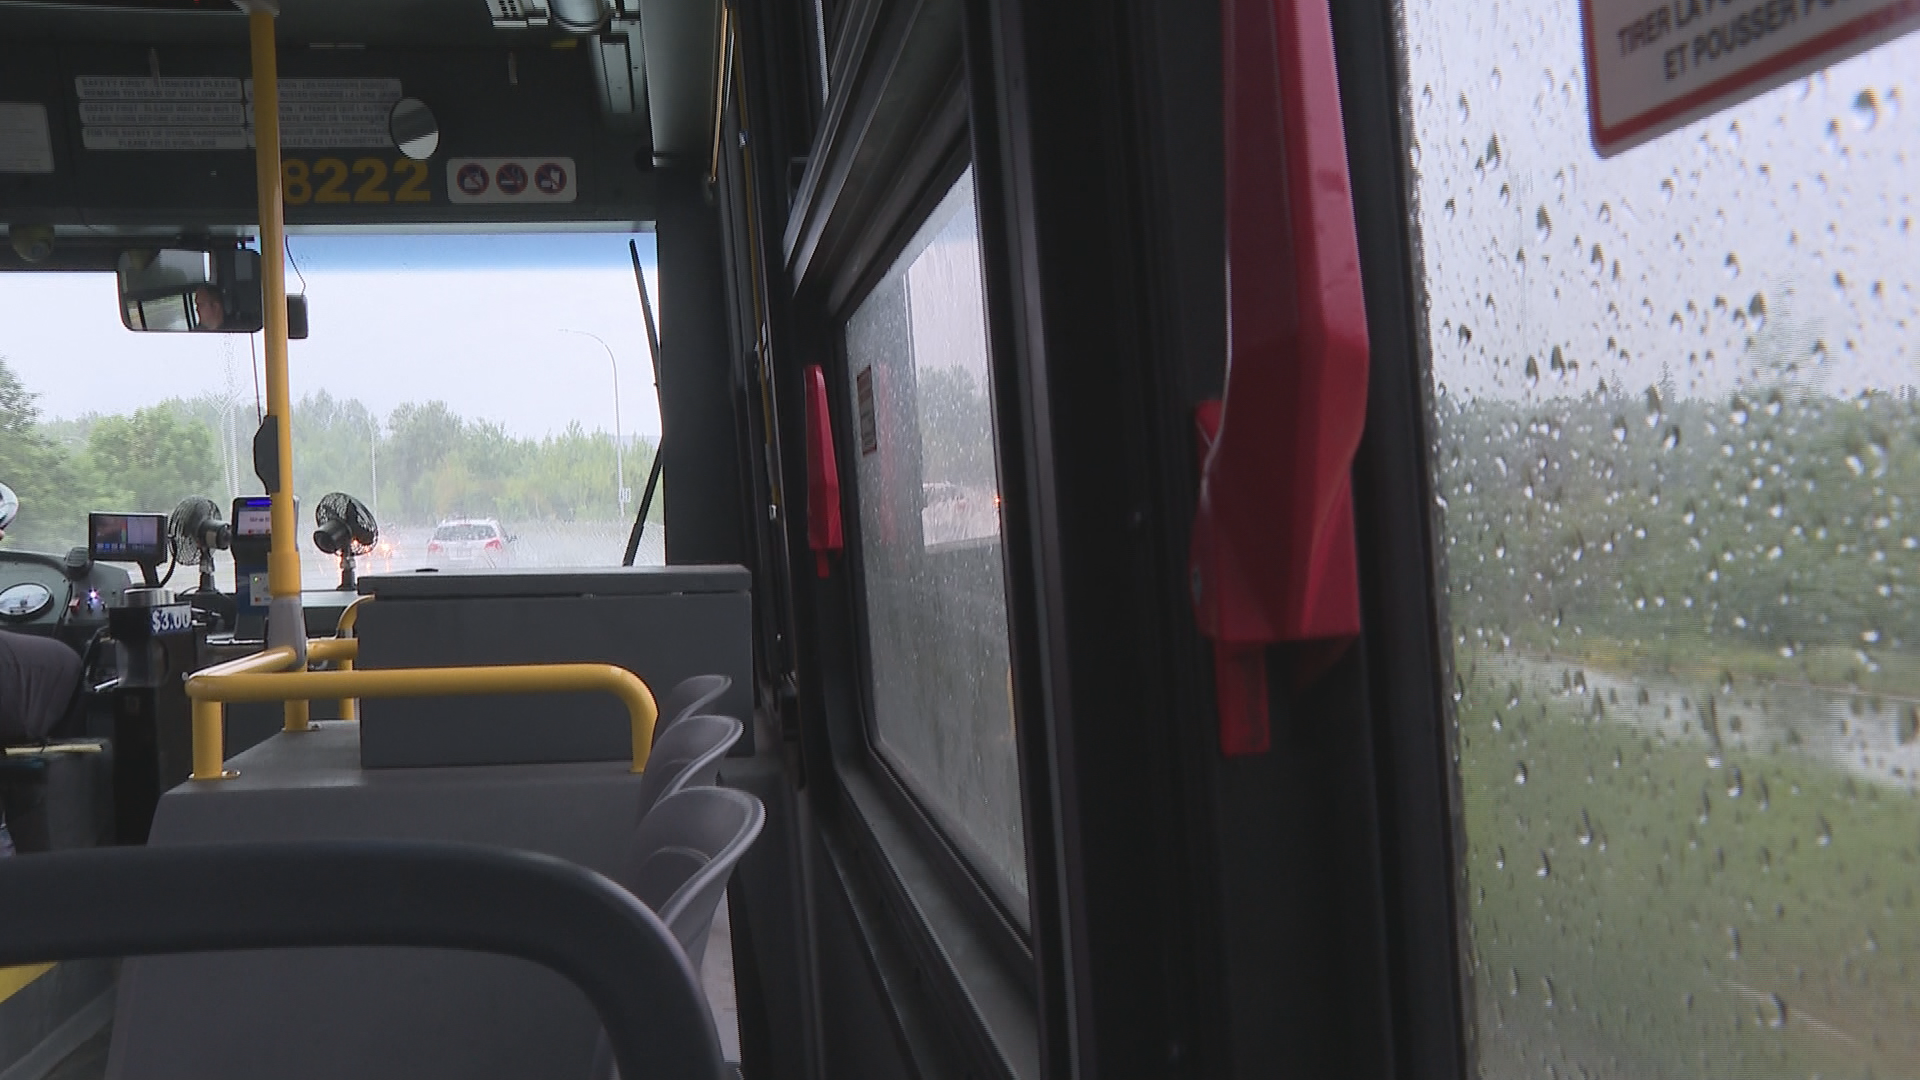 Sunday bus service takes to the streets in Fredericton